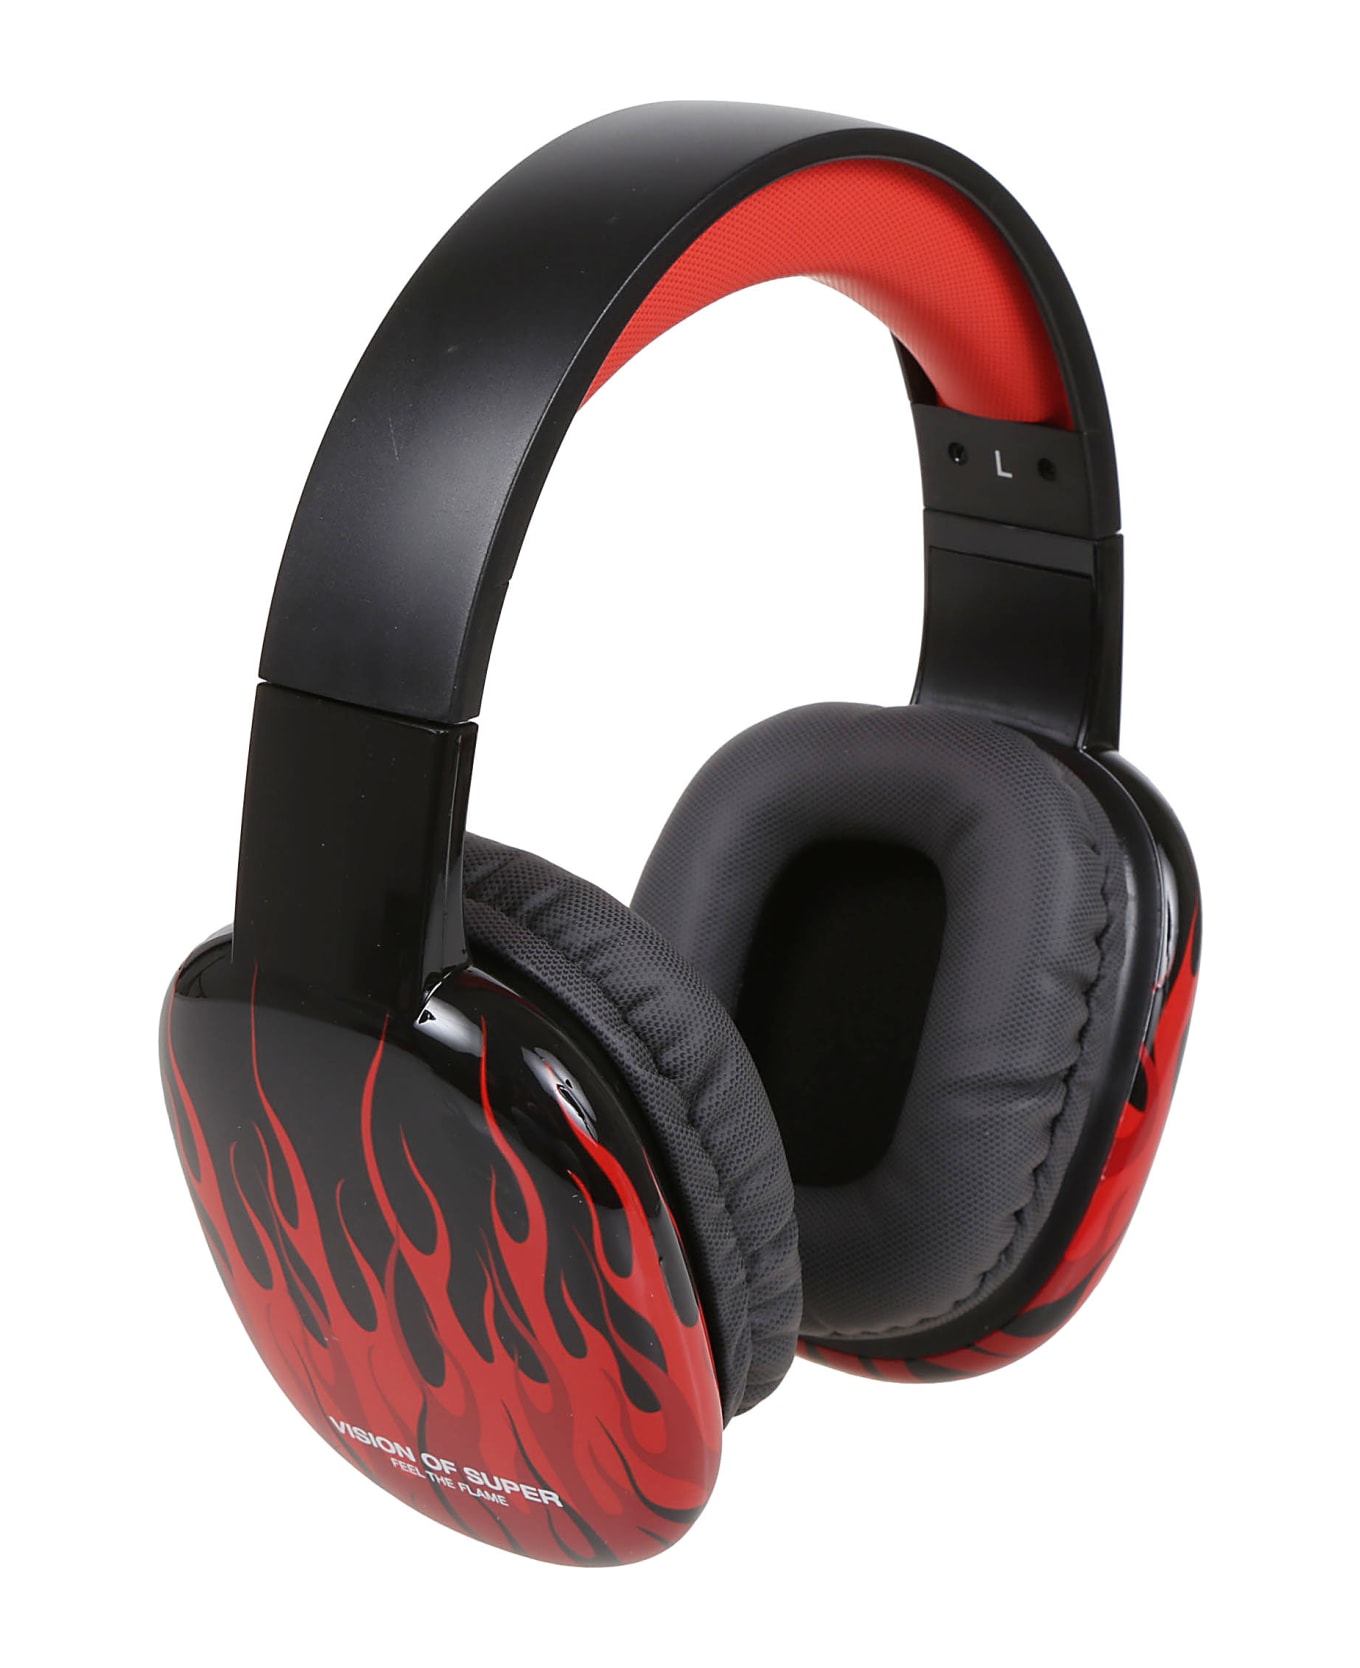 Vision of Super Black Headphones With Red Flames And White Logo - Black